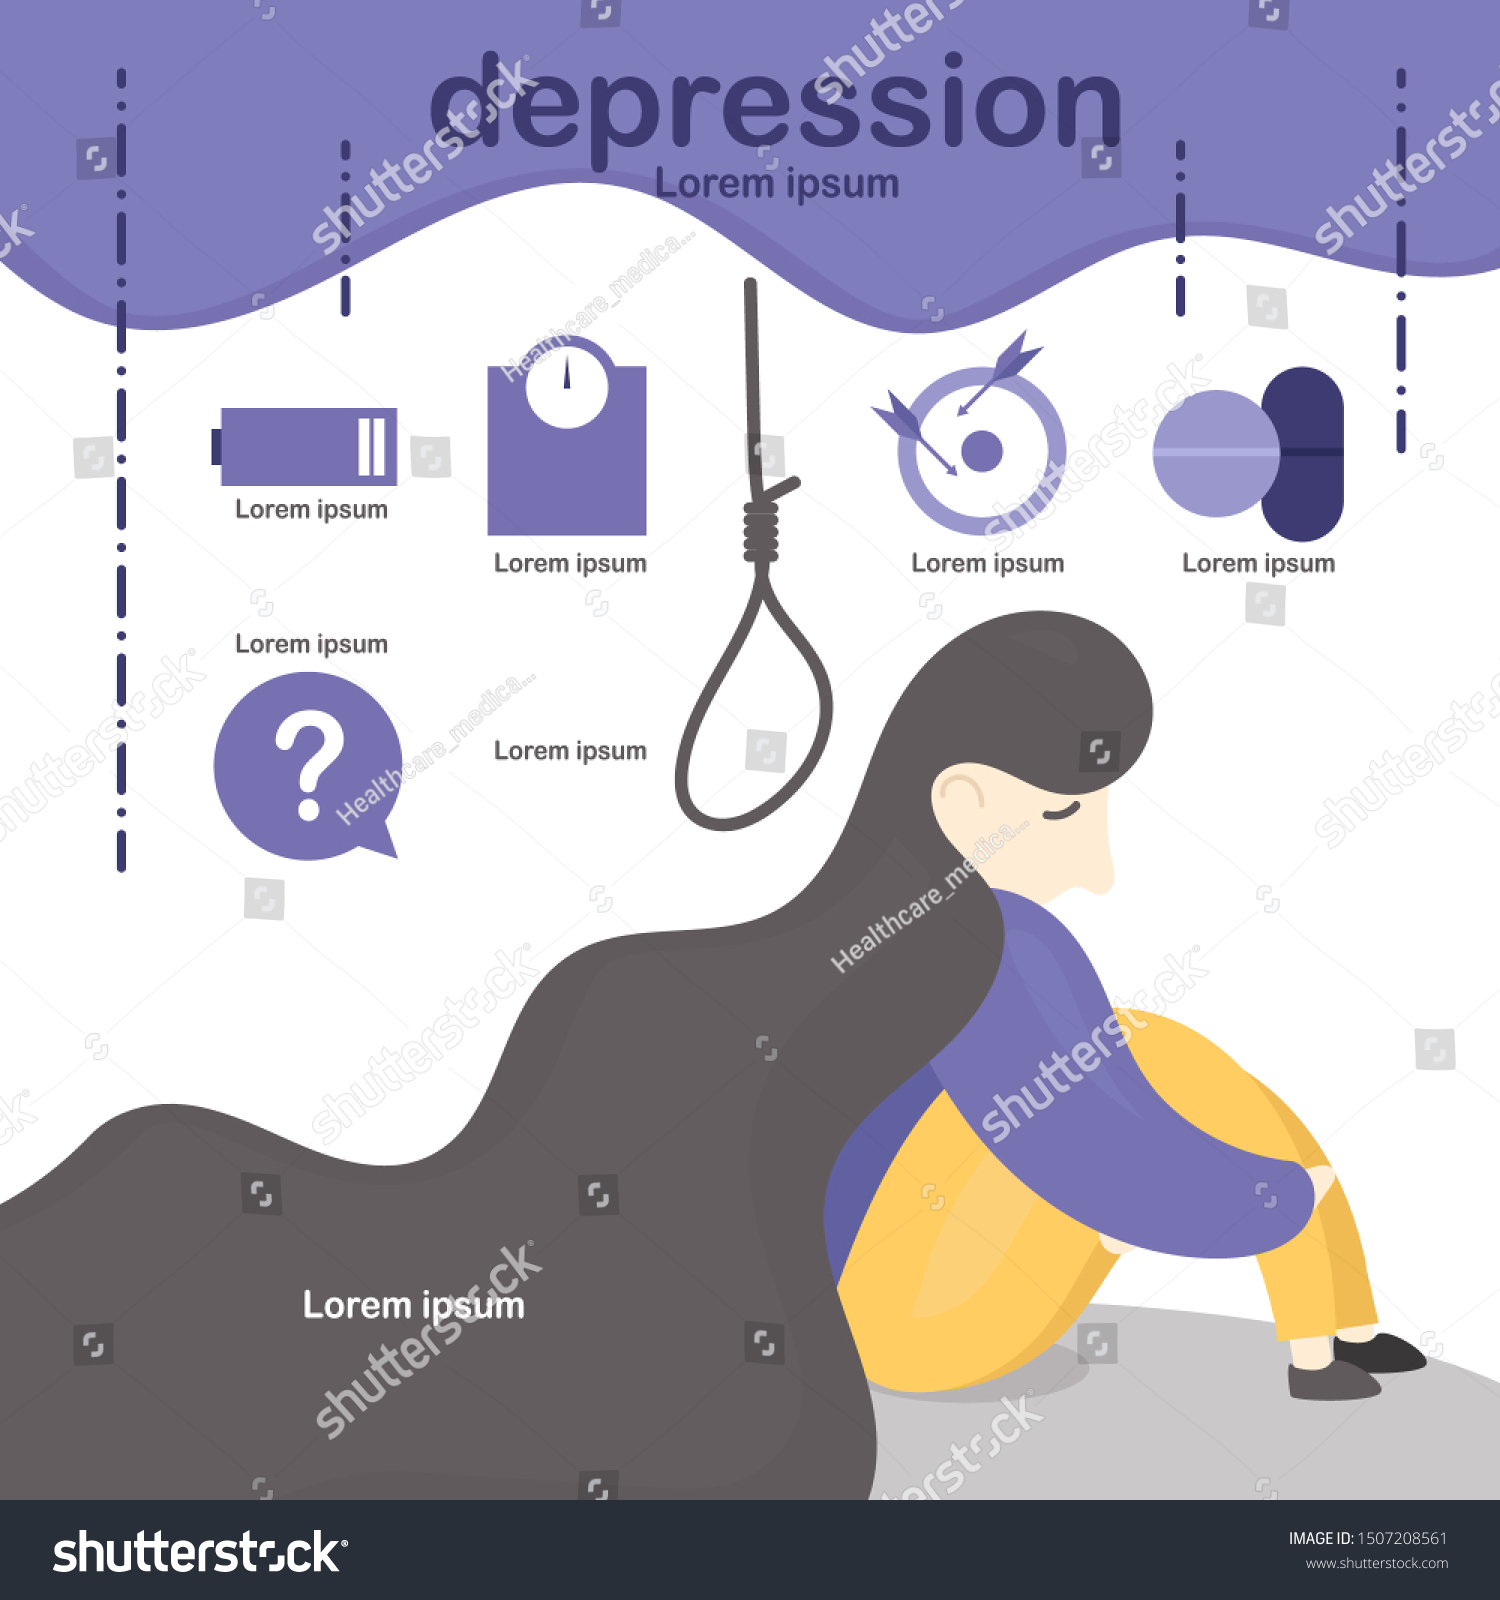 Healthcare Infographic About Depression Sign Symptom Stock Vector Royalty Free 1507208561 6249